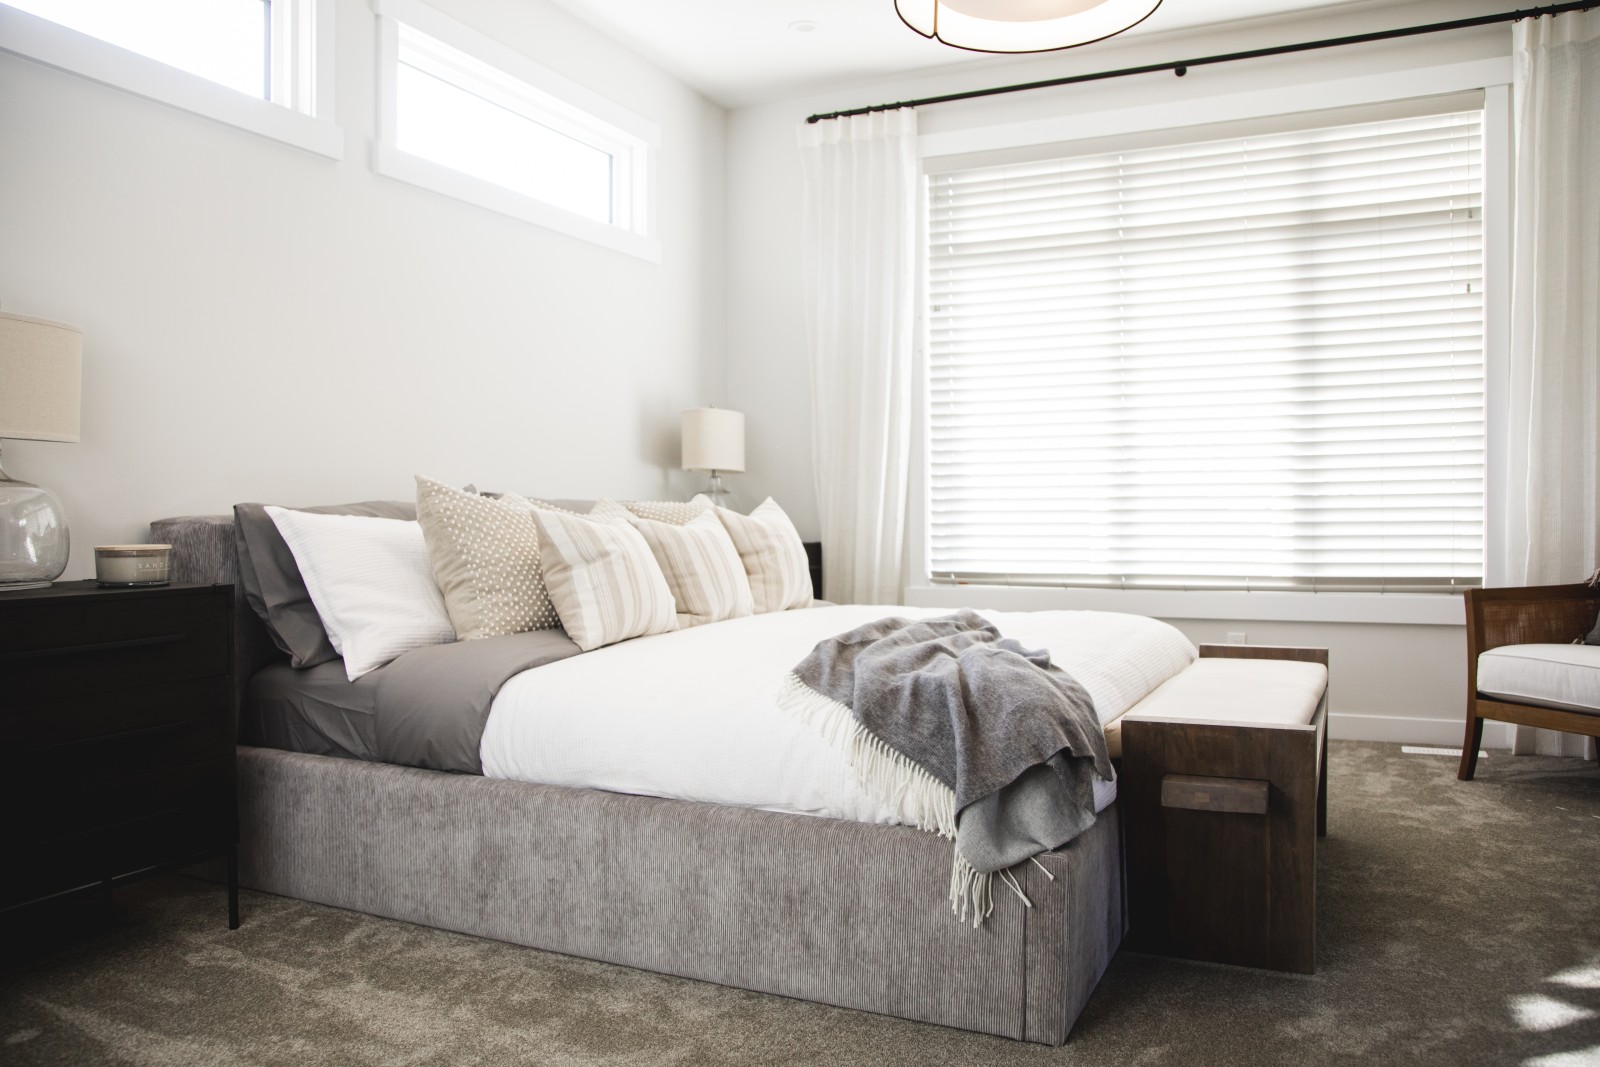 Natural light floods the master bedroom of the Odessa showhome through a wall of windows at the back of the room as well as two piano windows above the bed. An upholstered, grey platform bed is centered on the wall